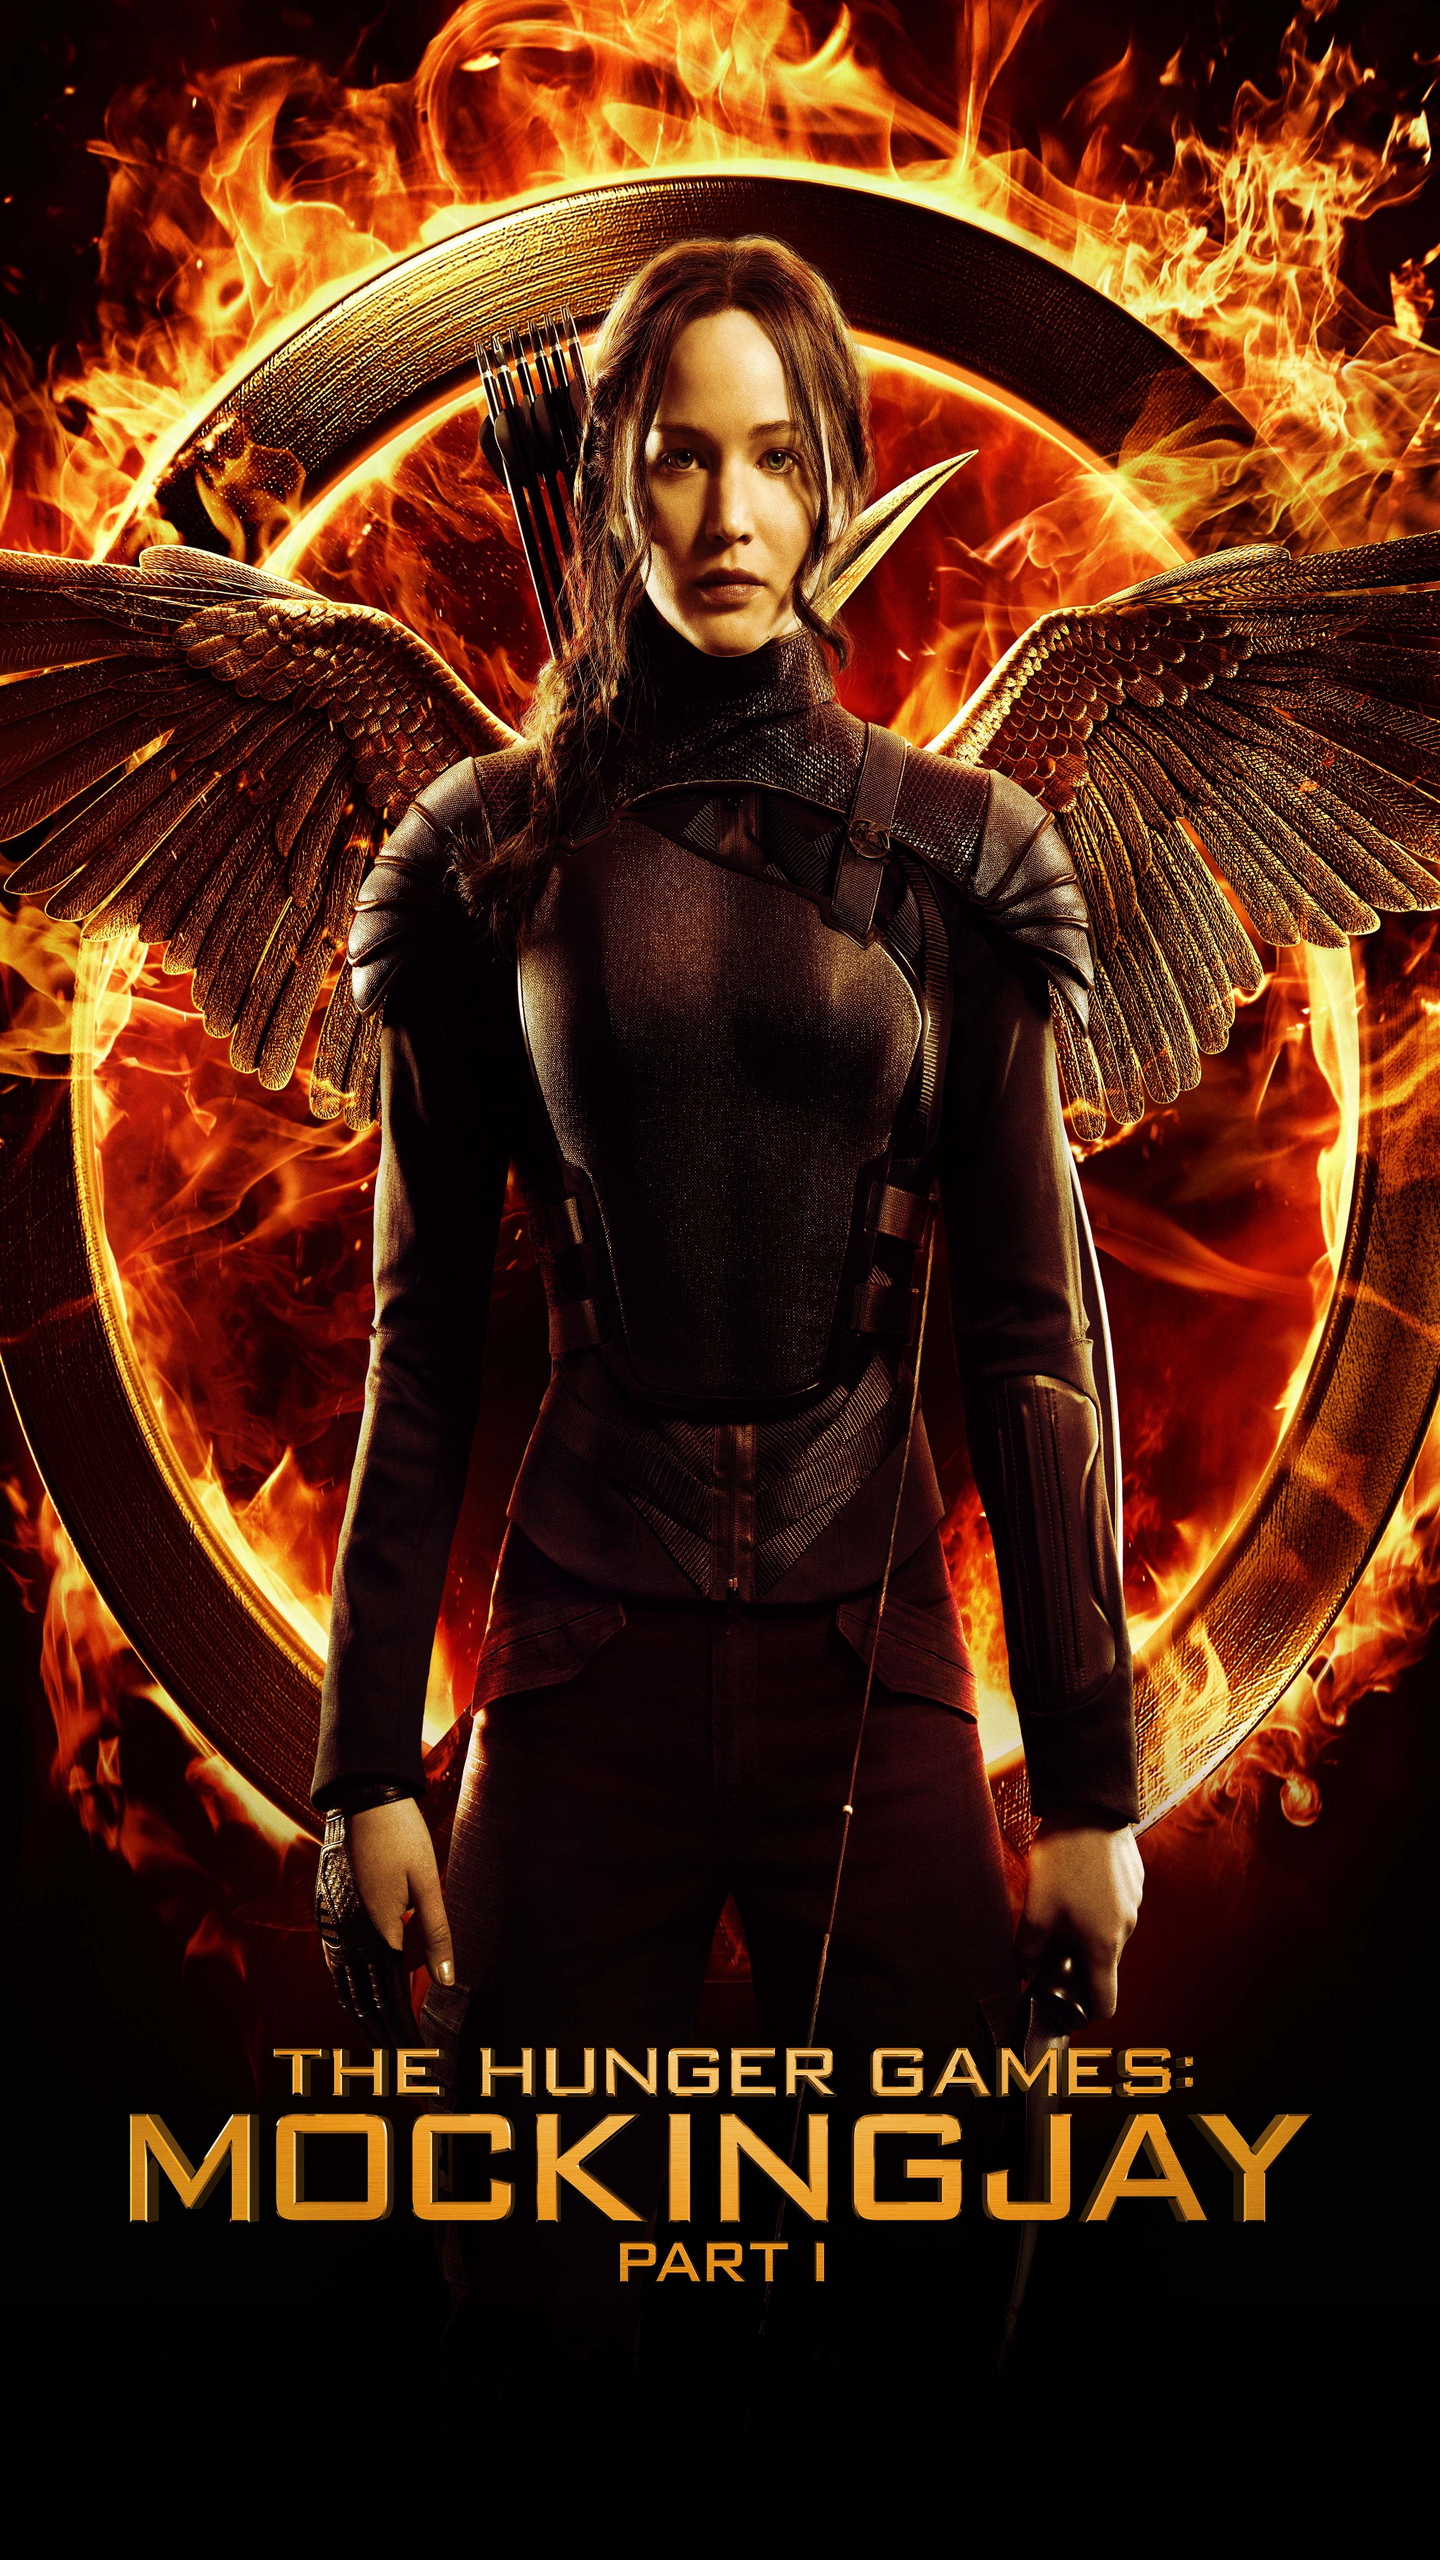 Mockingjay   Part 1 Galaxy Note 4 Wallpaper Archives   Wallpapers 1440x2560